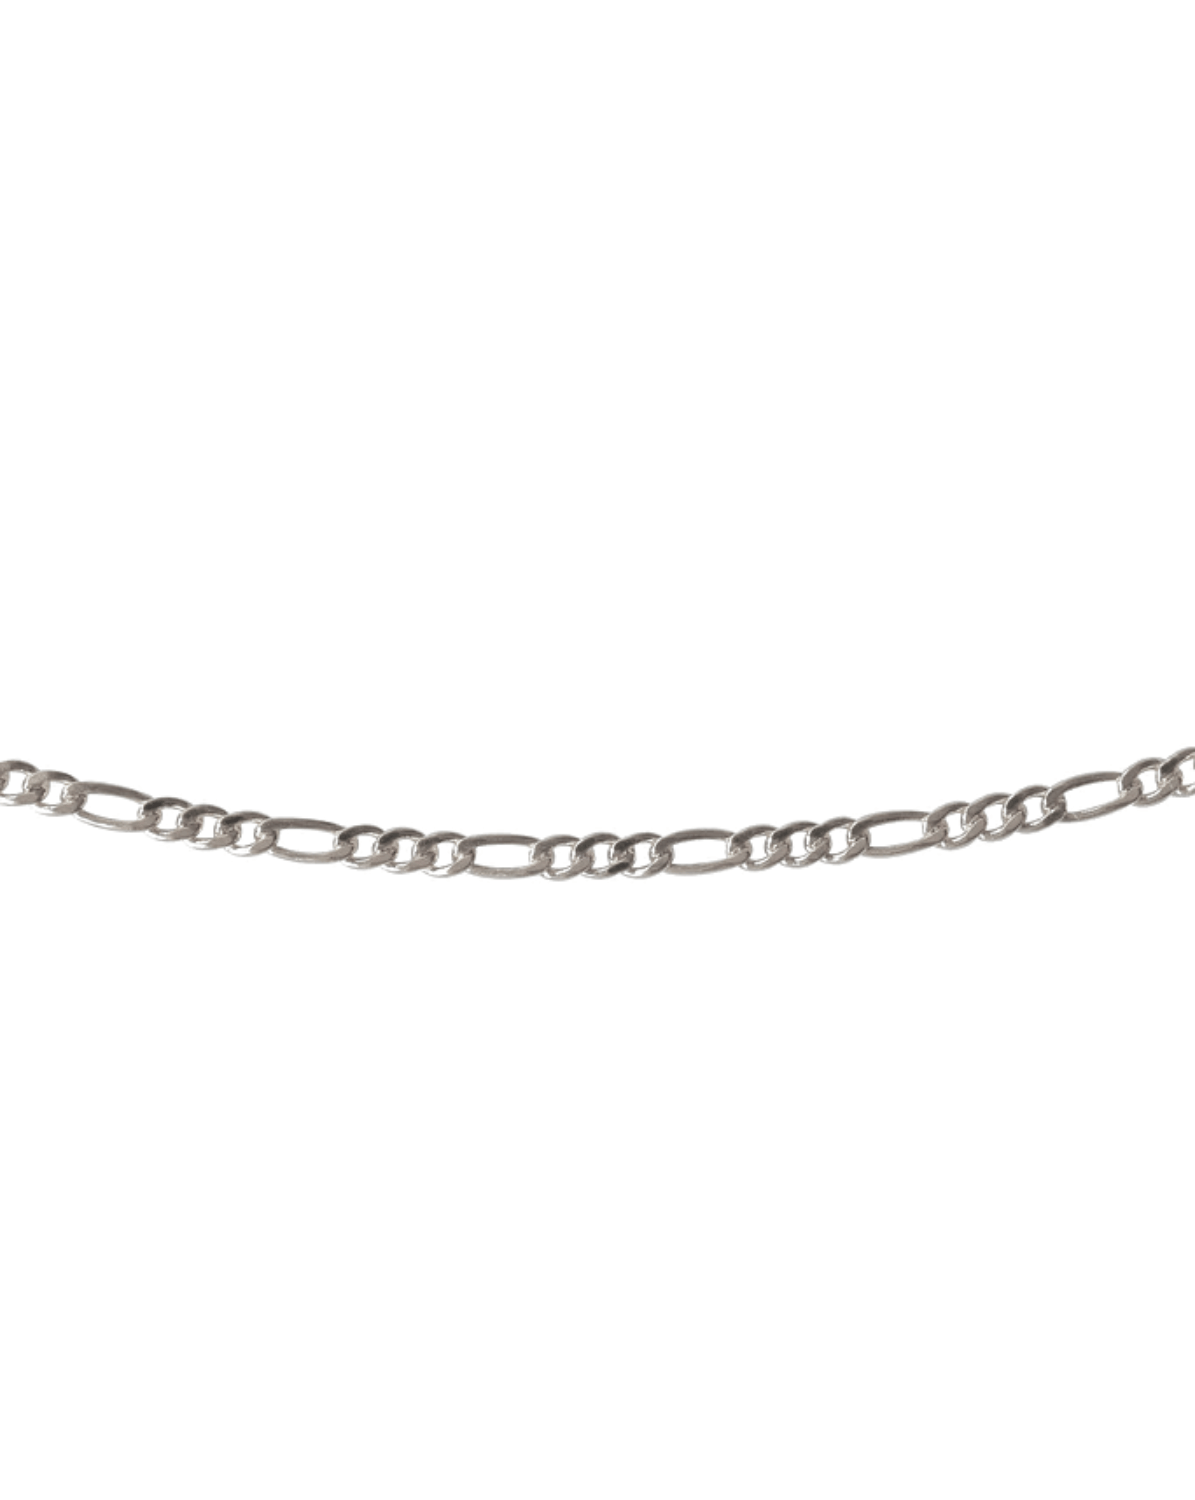 Figaro Chain Necklace - Sterling Sliver